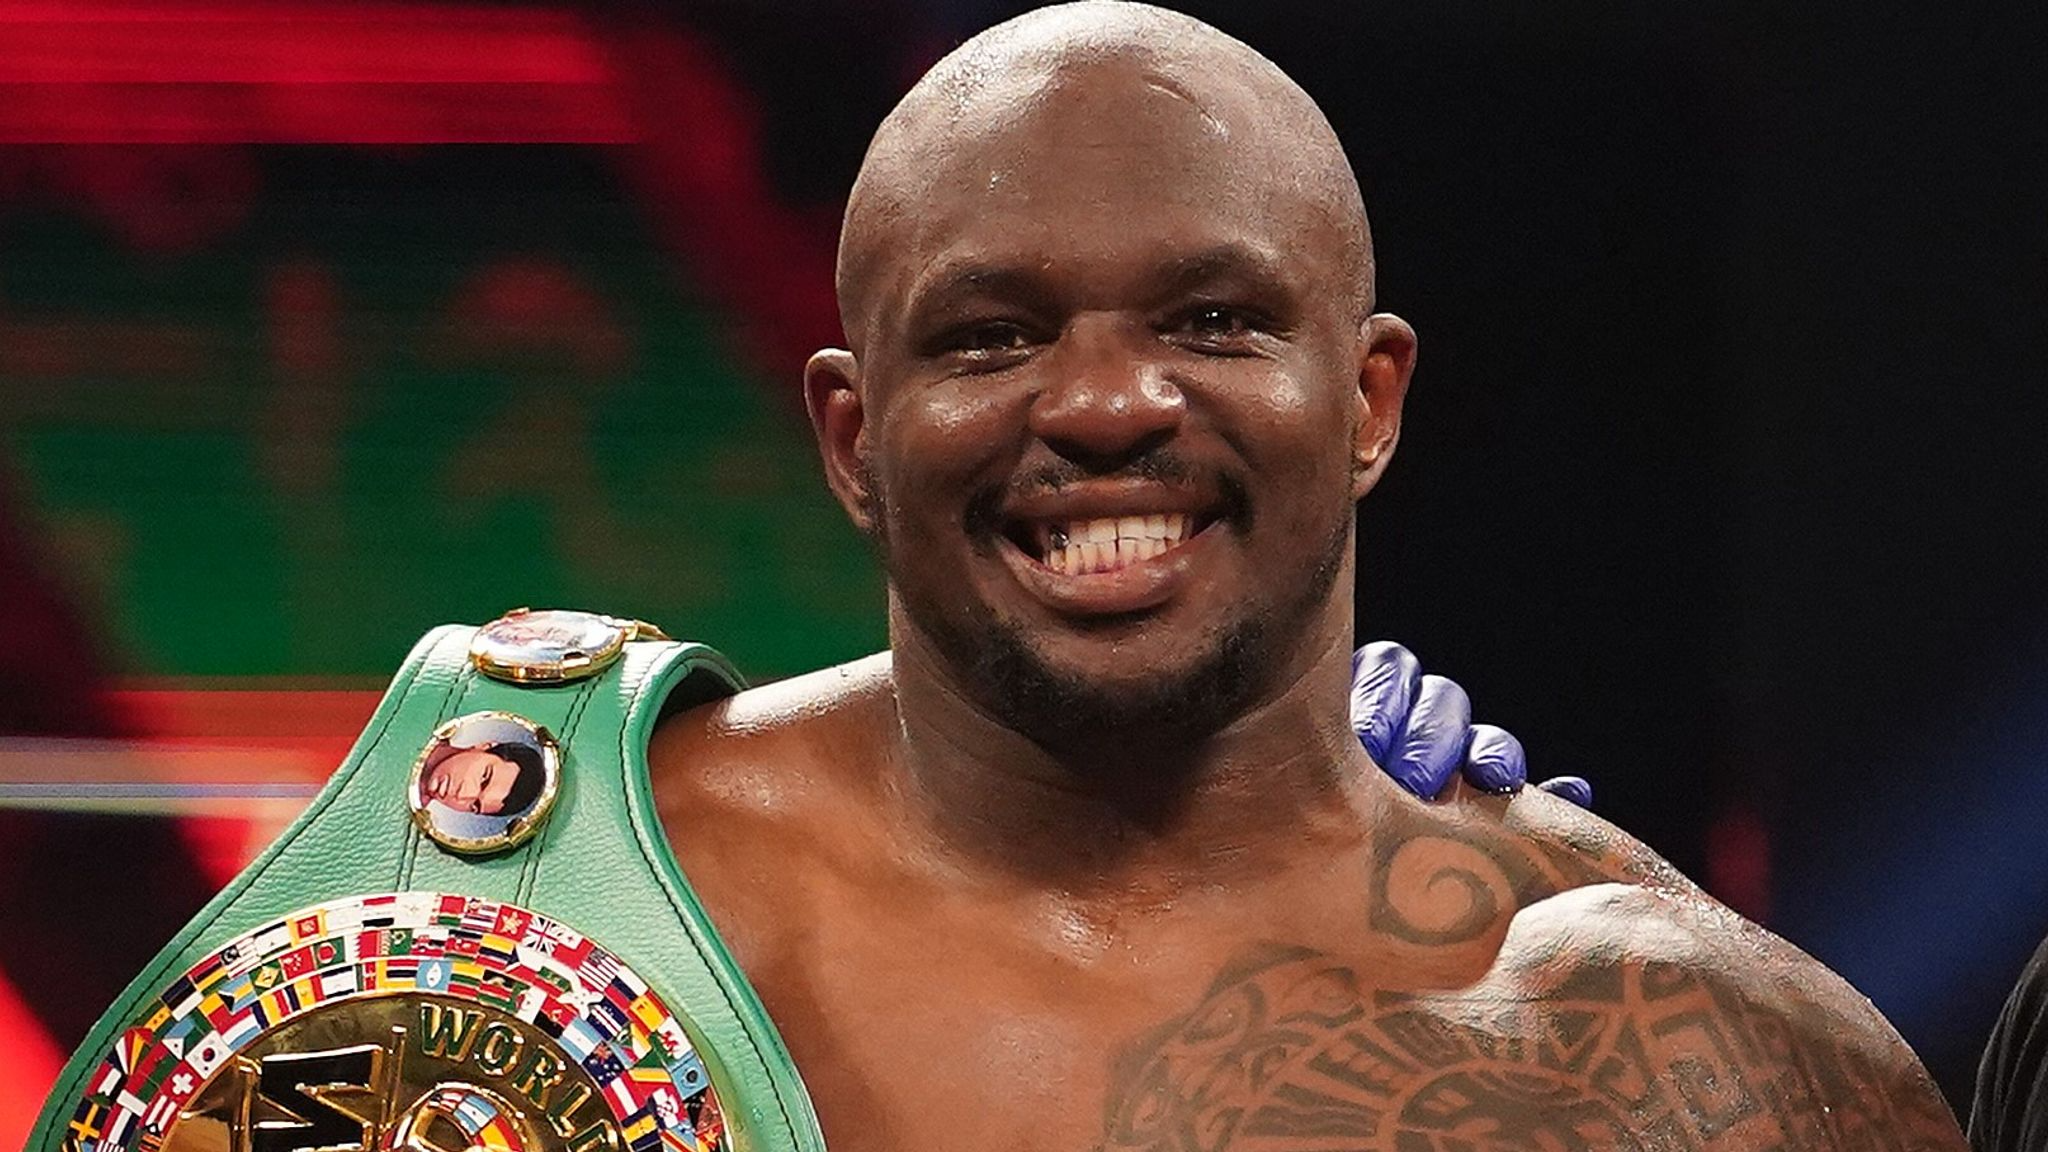 Dillian Whyte Fails Doping Test, Fight With Anthony Joshua Canceled